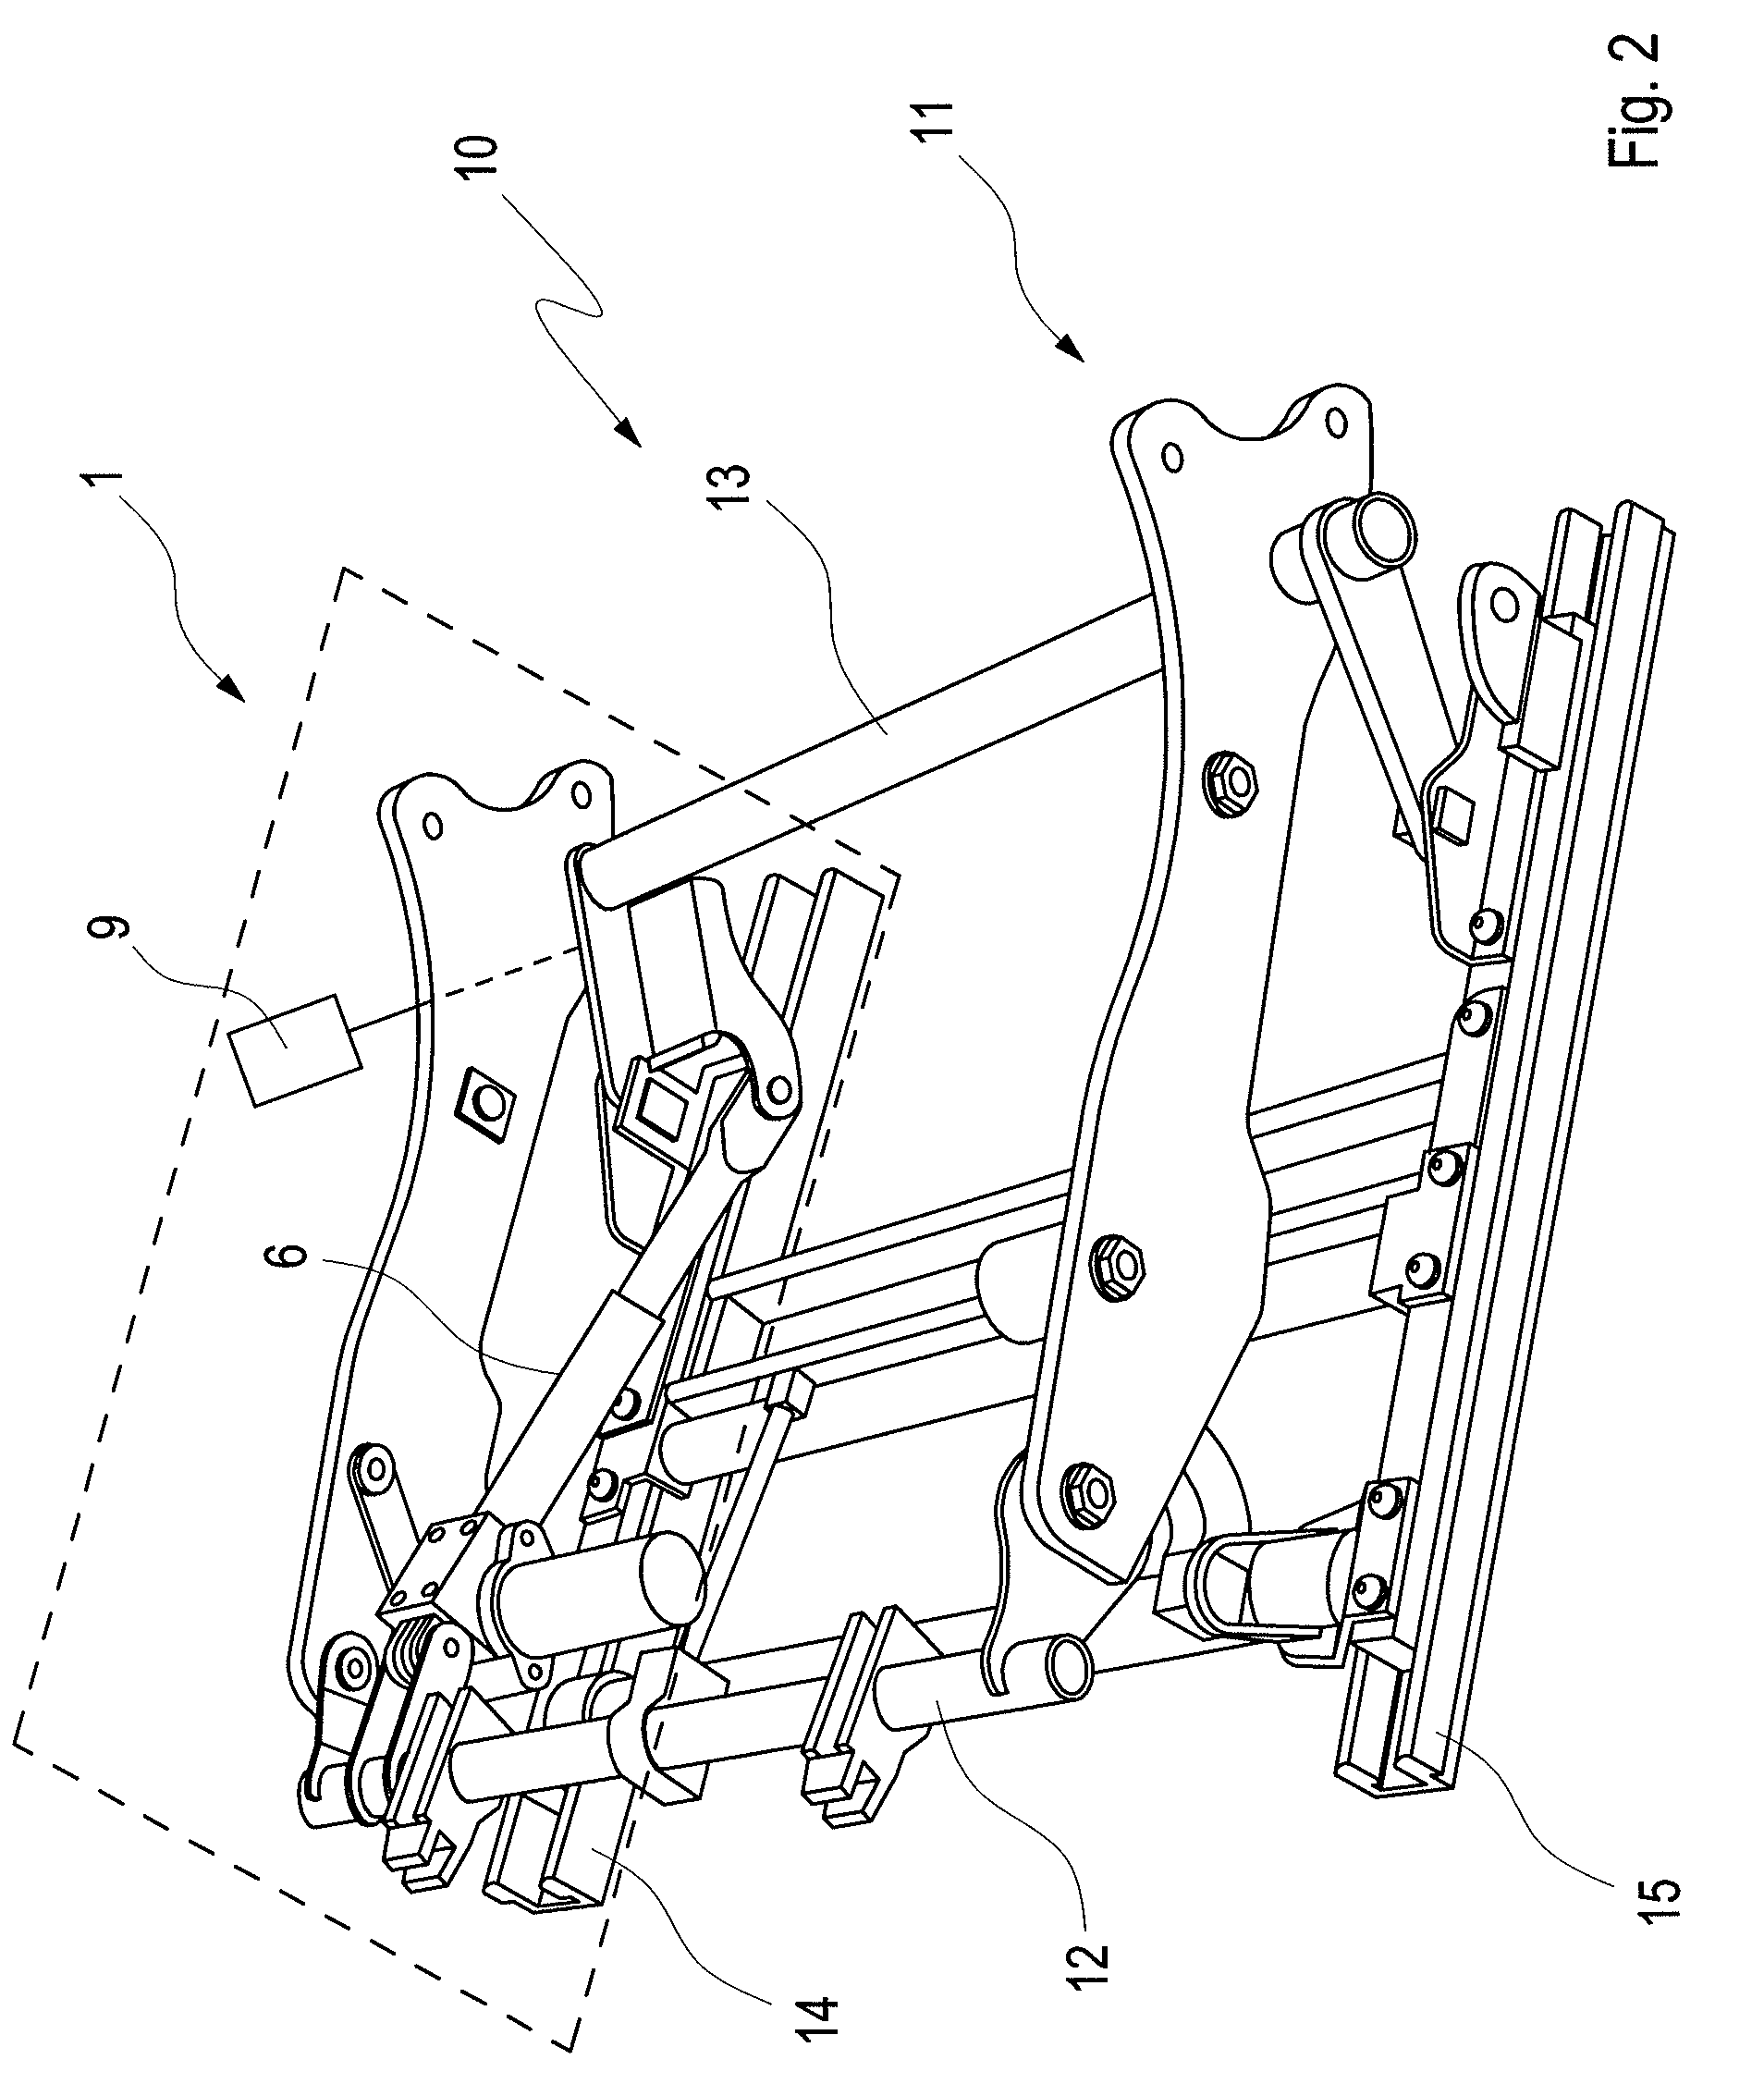 Height adjustment device for a vehicle seat